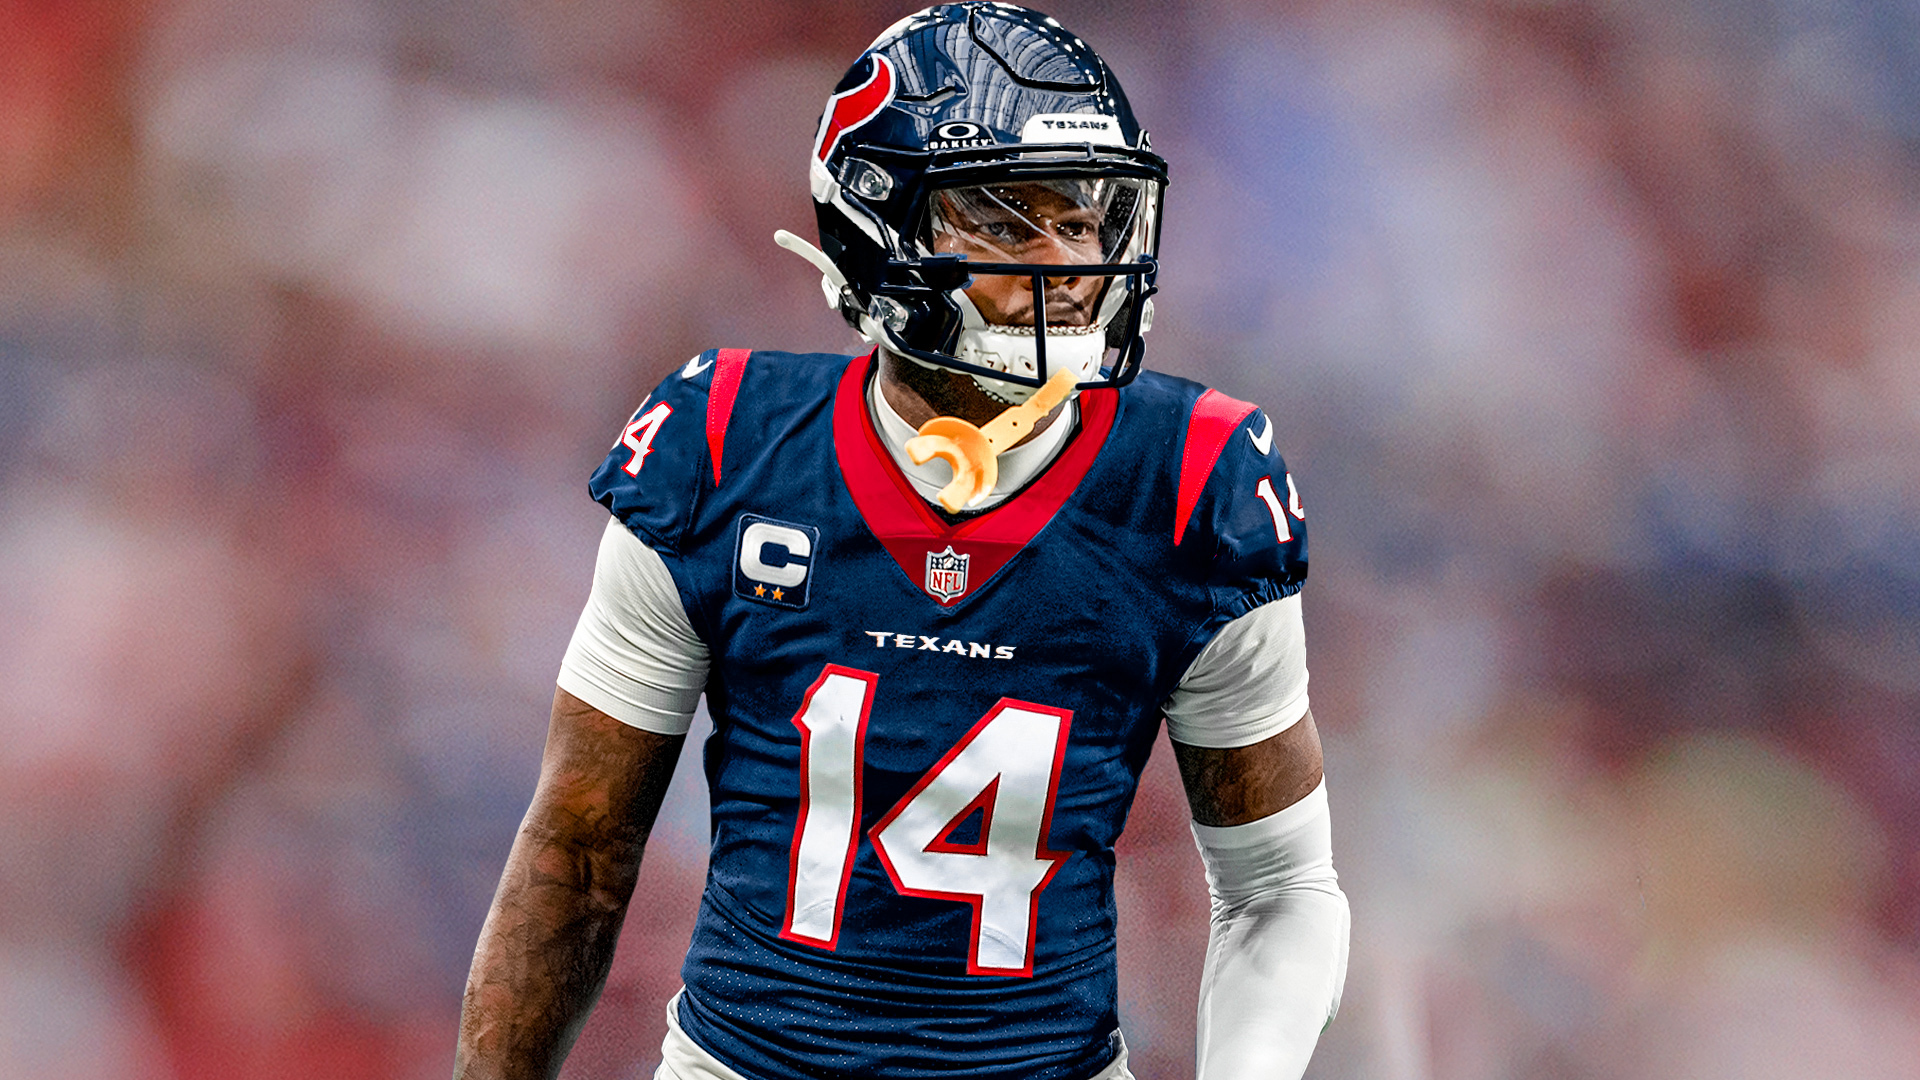 Houston Texans wide receiver Stefon Diggs